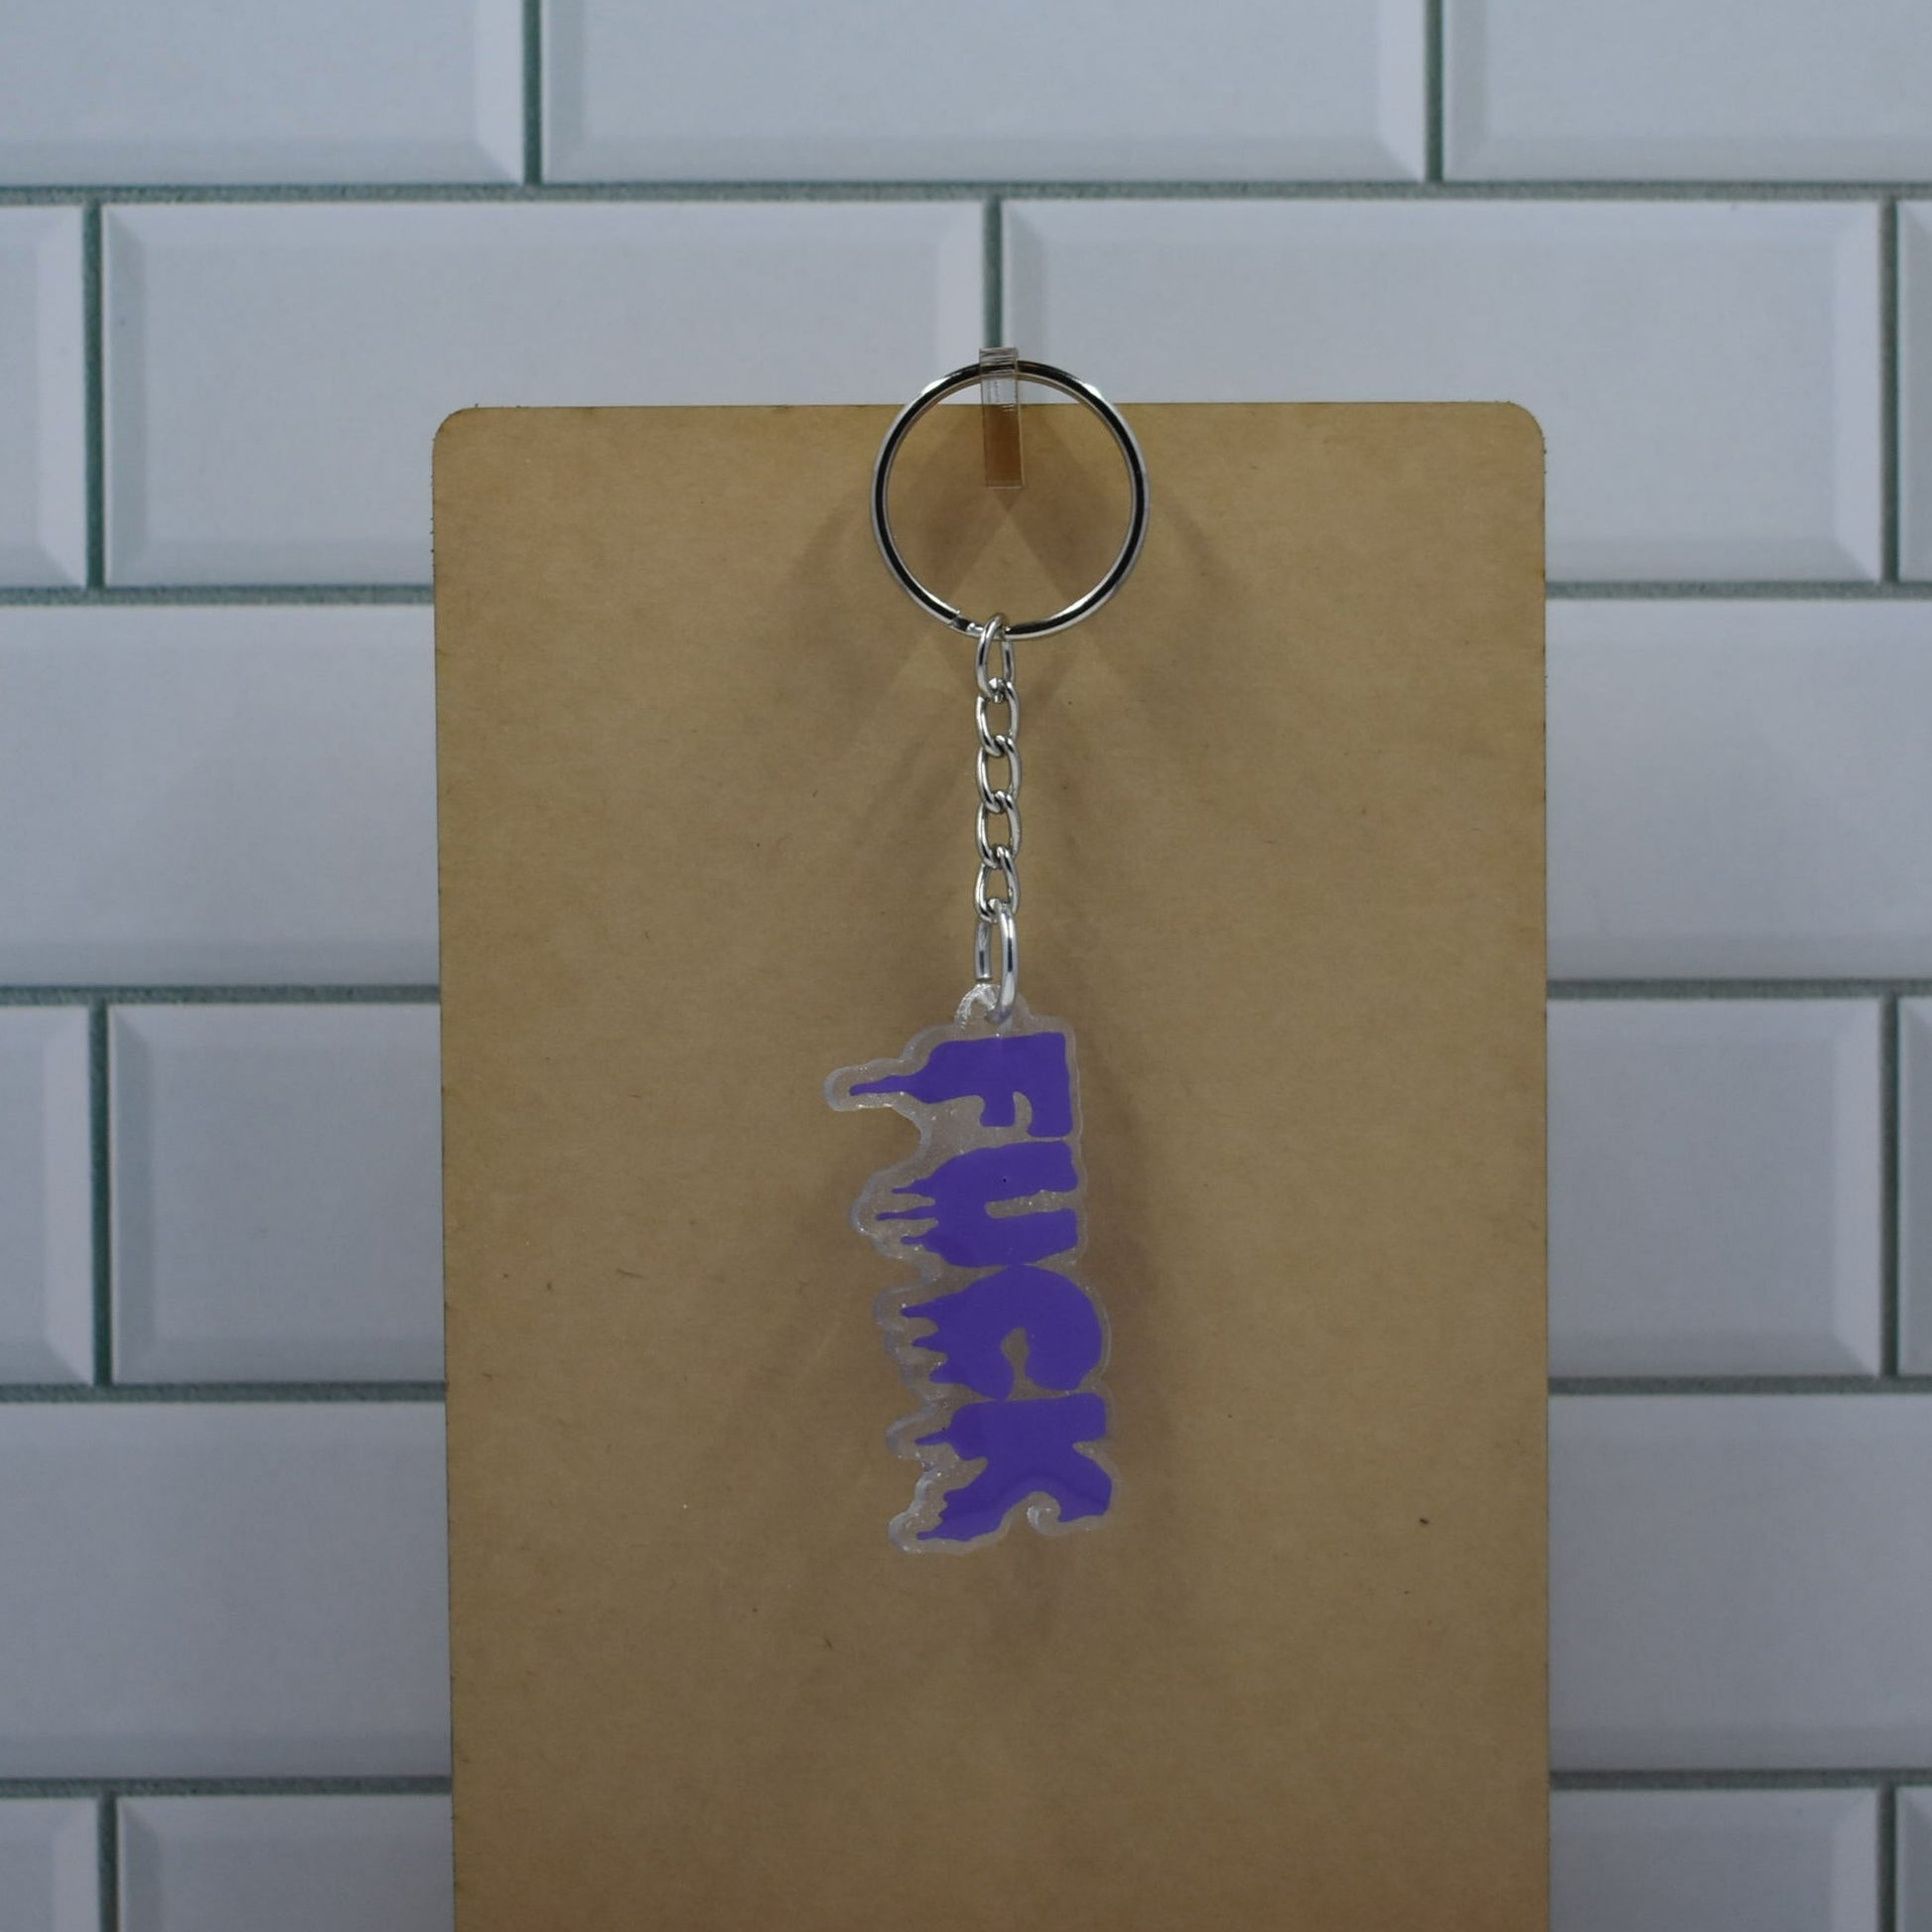 Acrylic keychain resin Dripping F%@#...that naughty 4 letter word